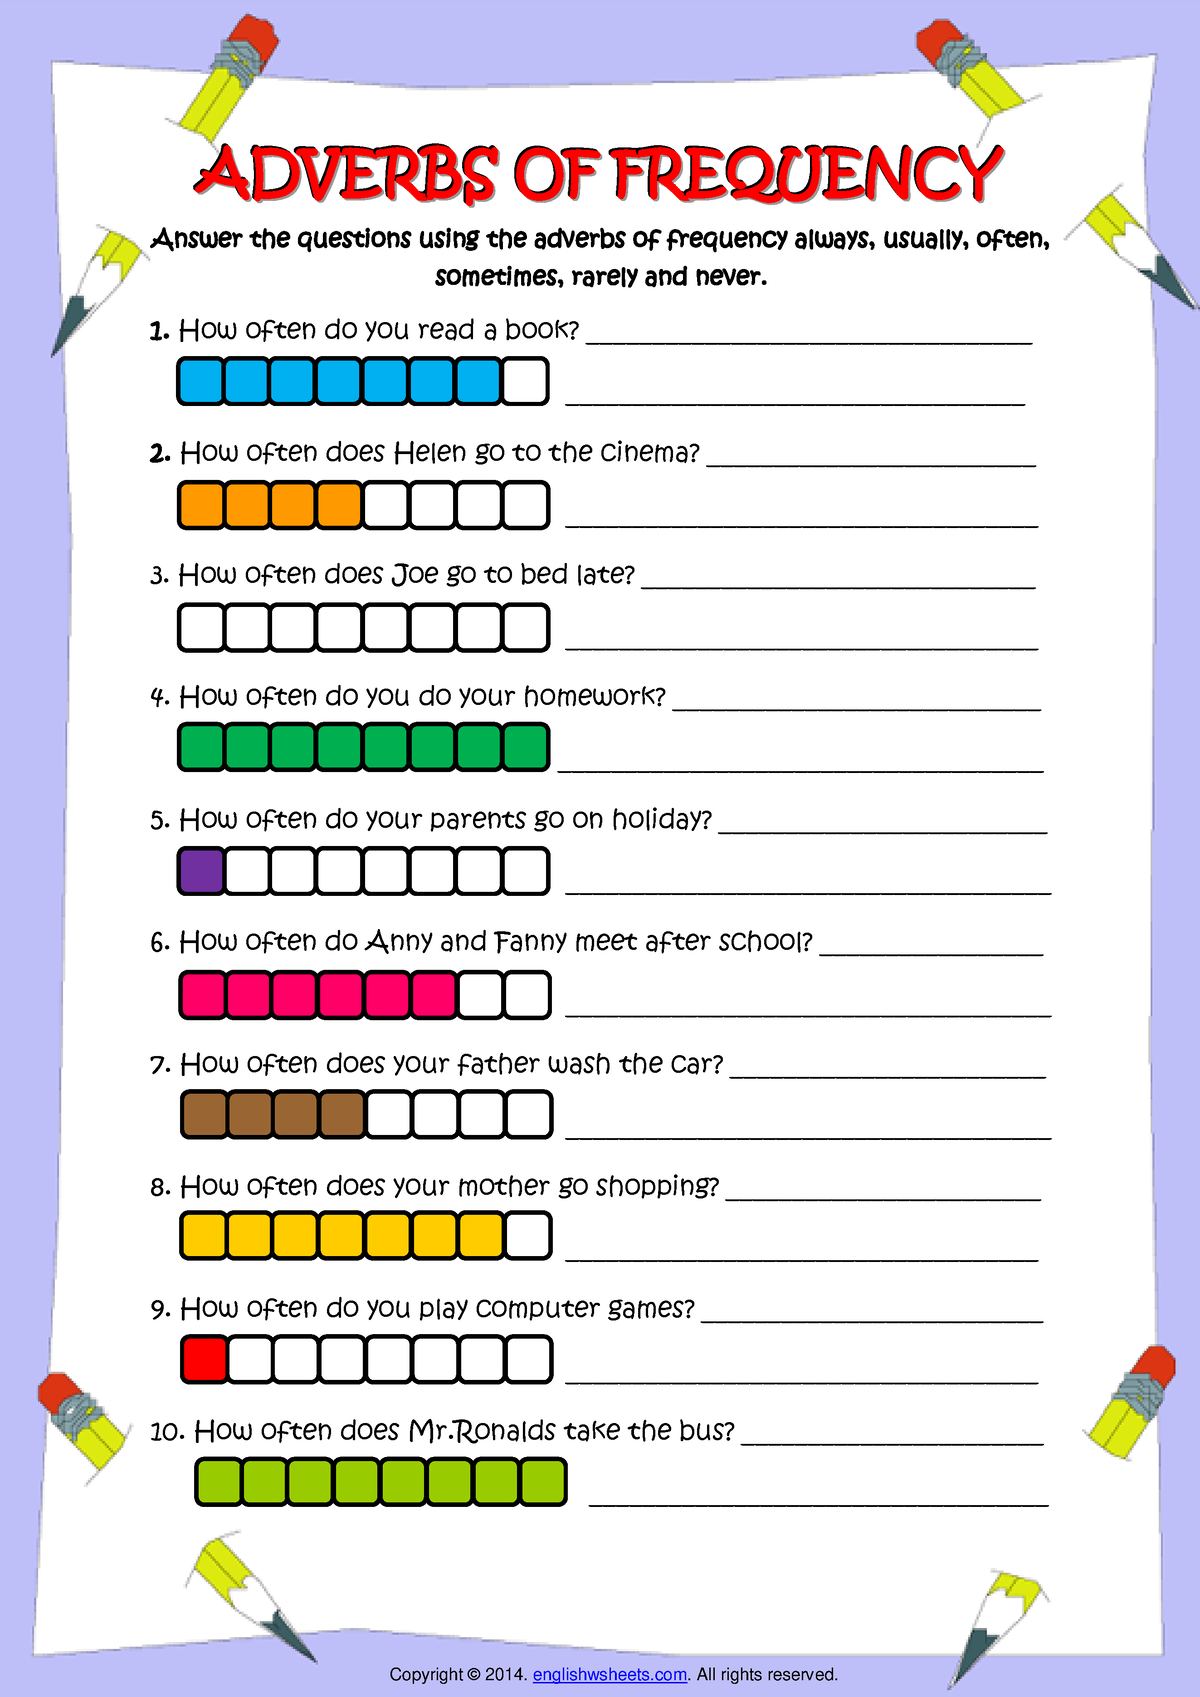 Adverbs Of Frequency Worksheet For Grade 4 Adverb Of - vrogue.co